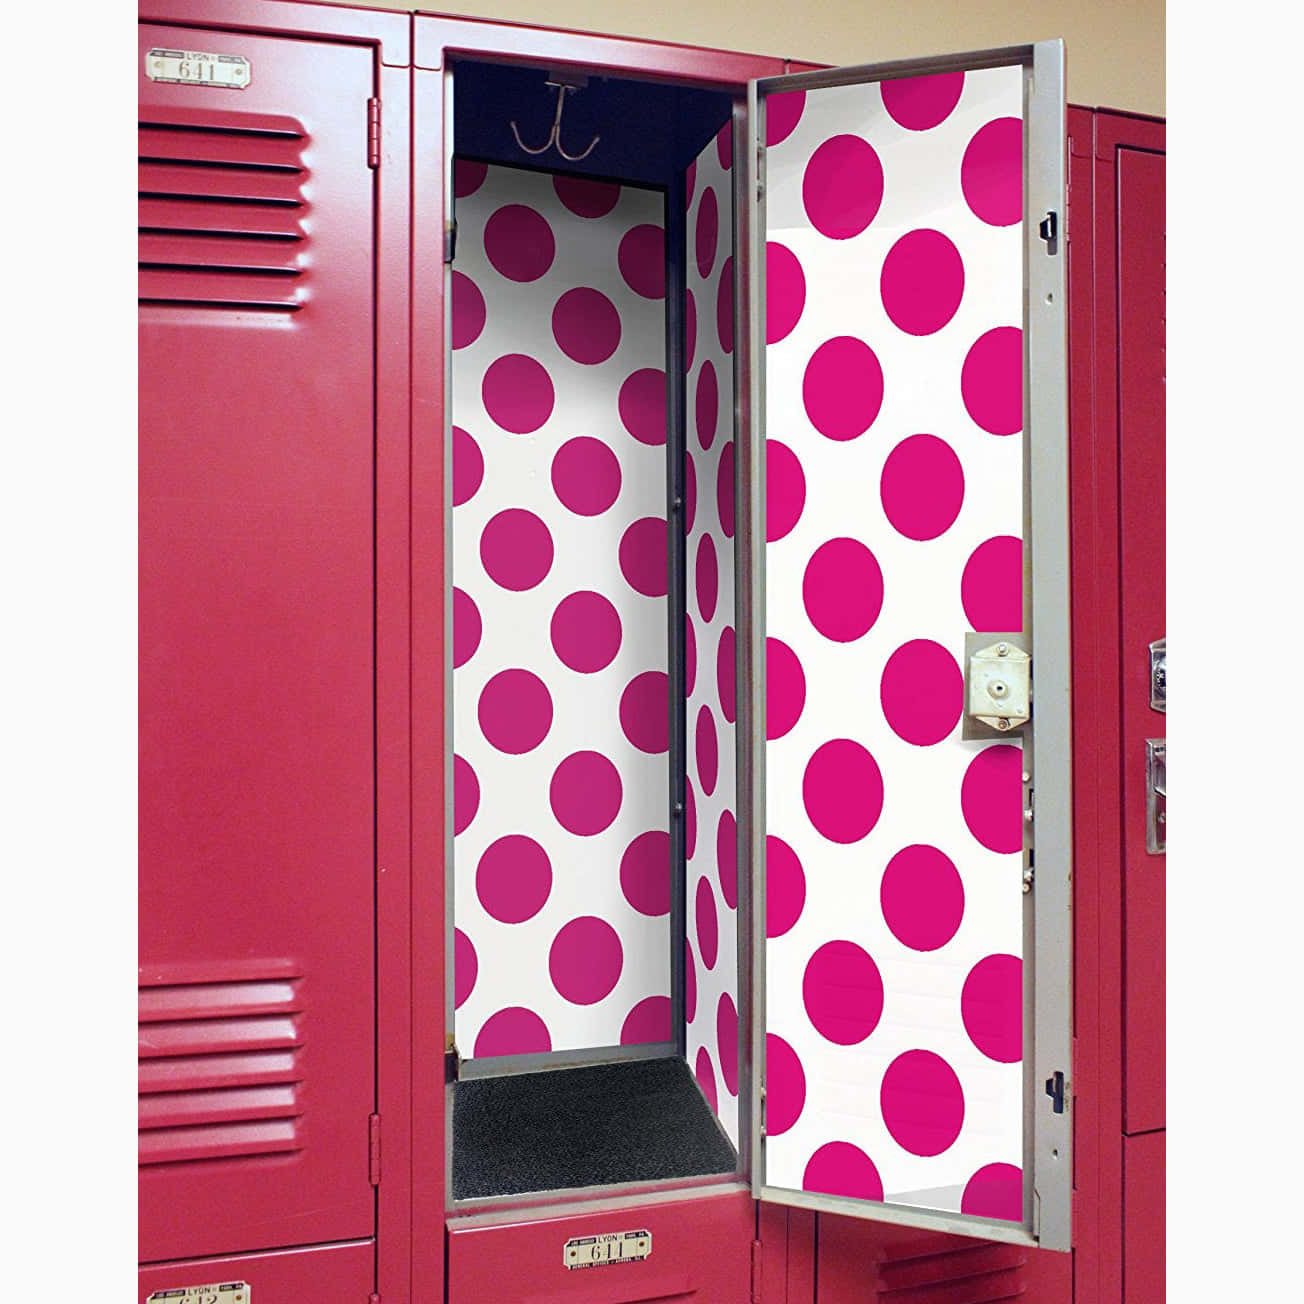 Master the Art of Organization with an Attractive Locker